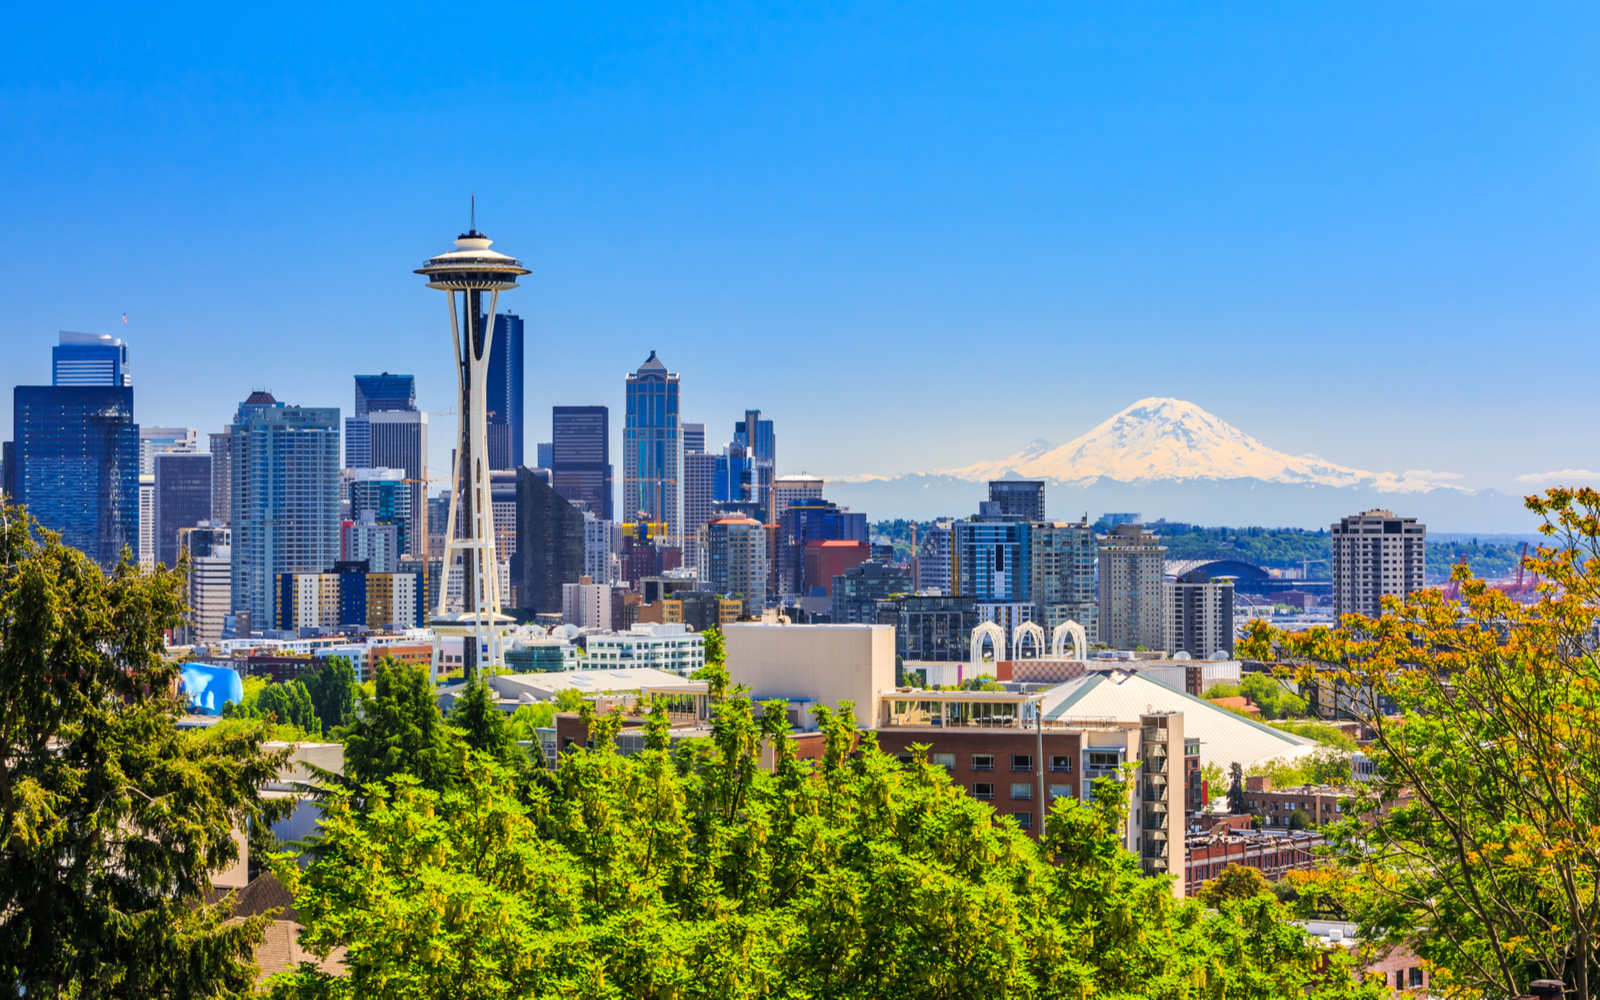 Cover image for a piece on the best things to do in Seattle featuring Mount Rainier and the sky needle in the foreground